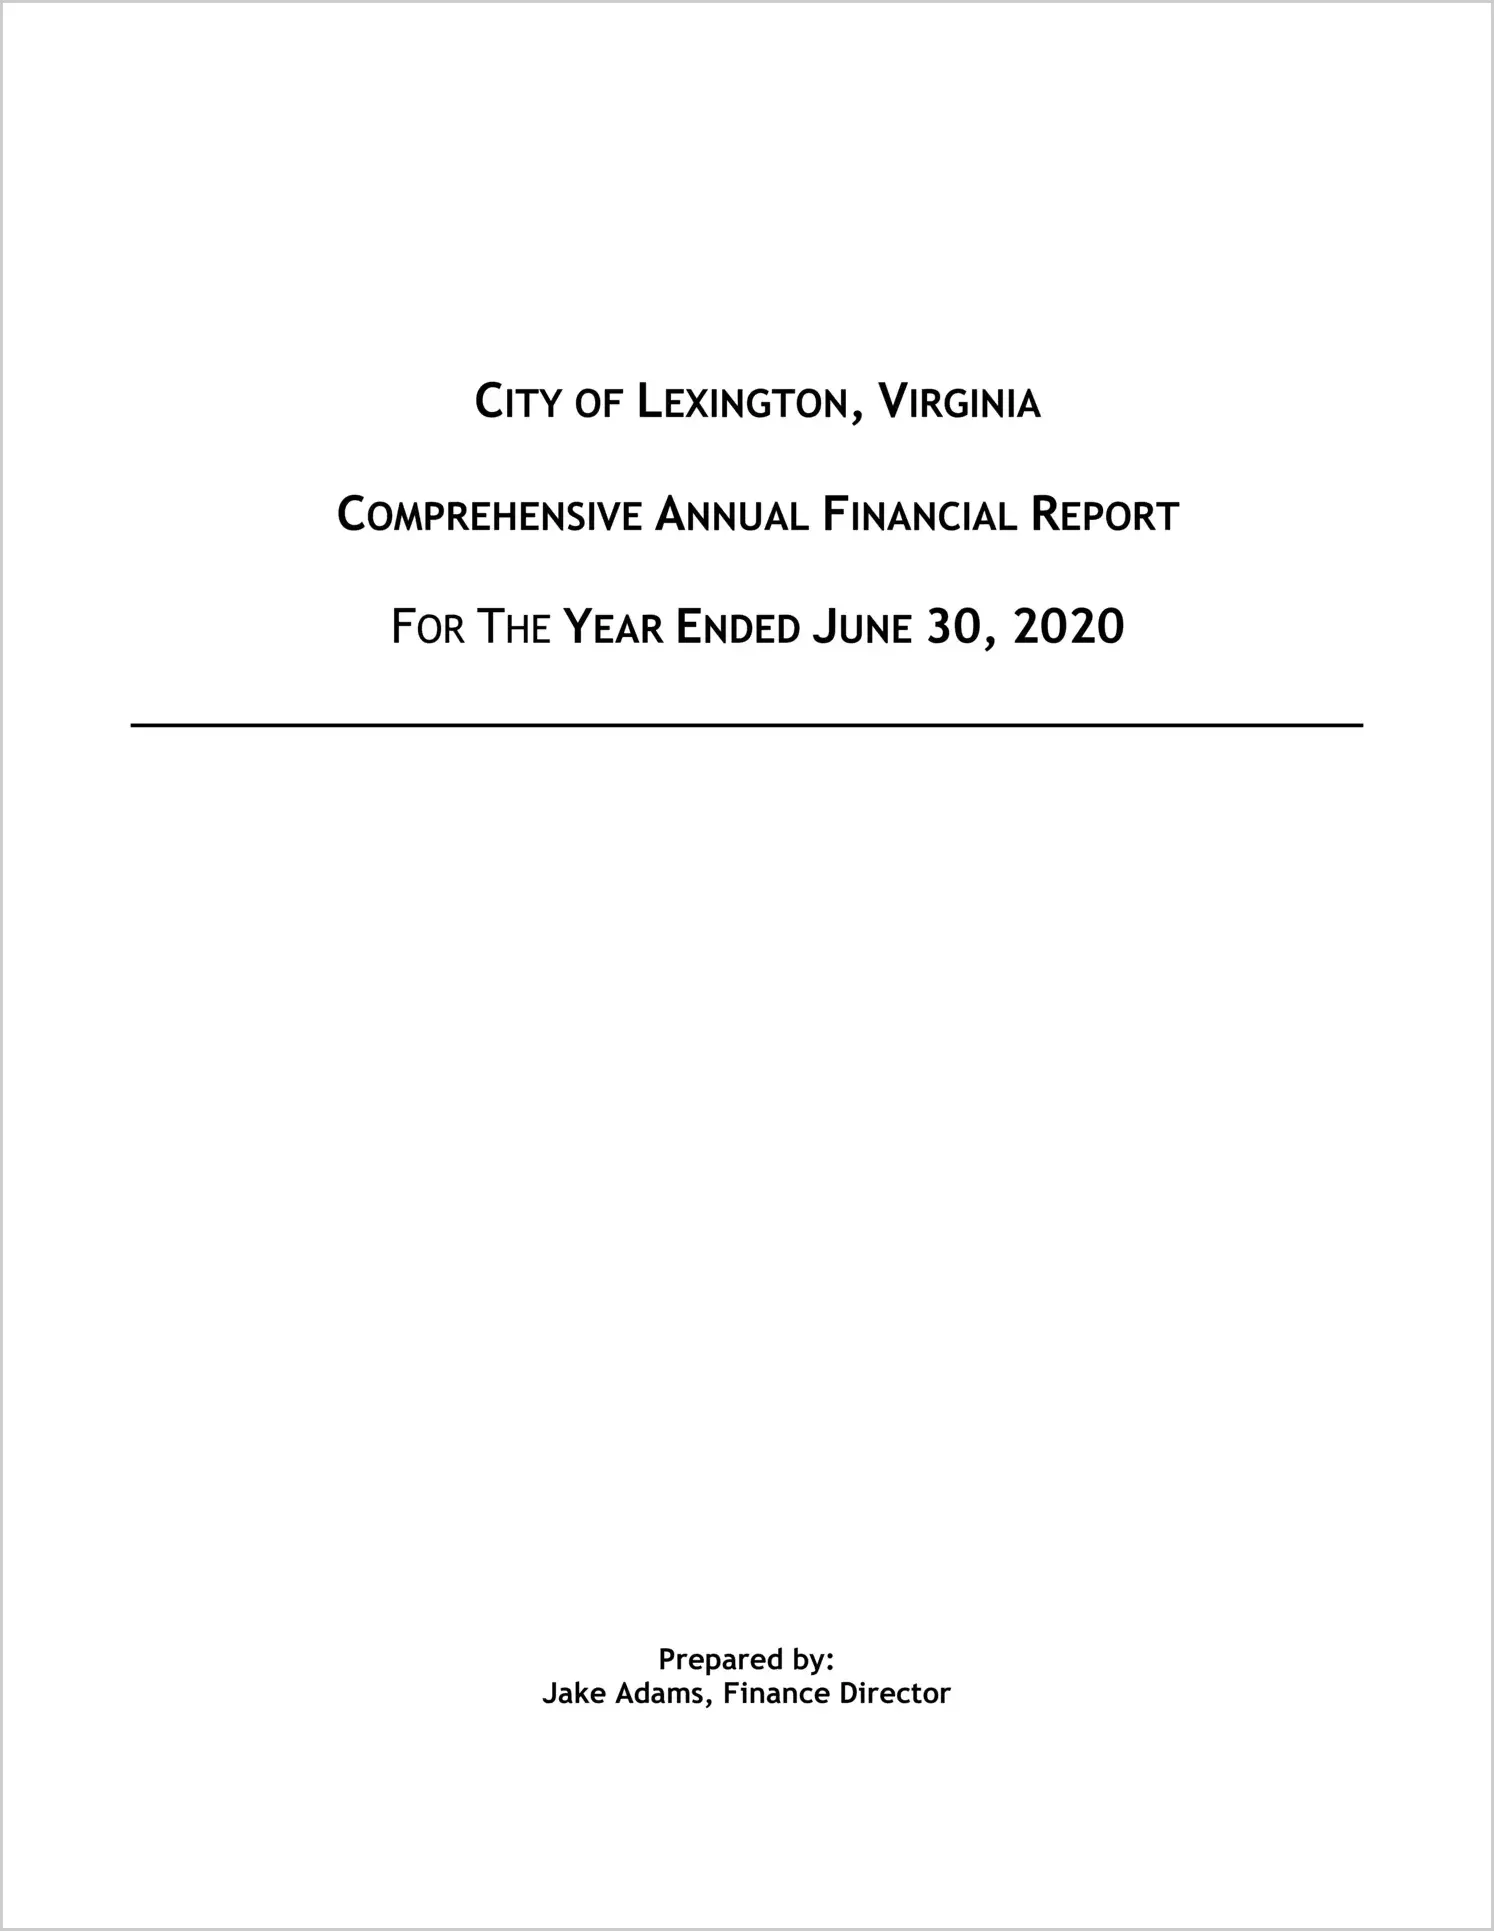 2020 Annual Financial Report for City of Lexington